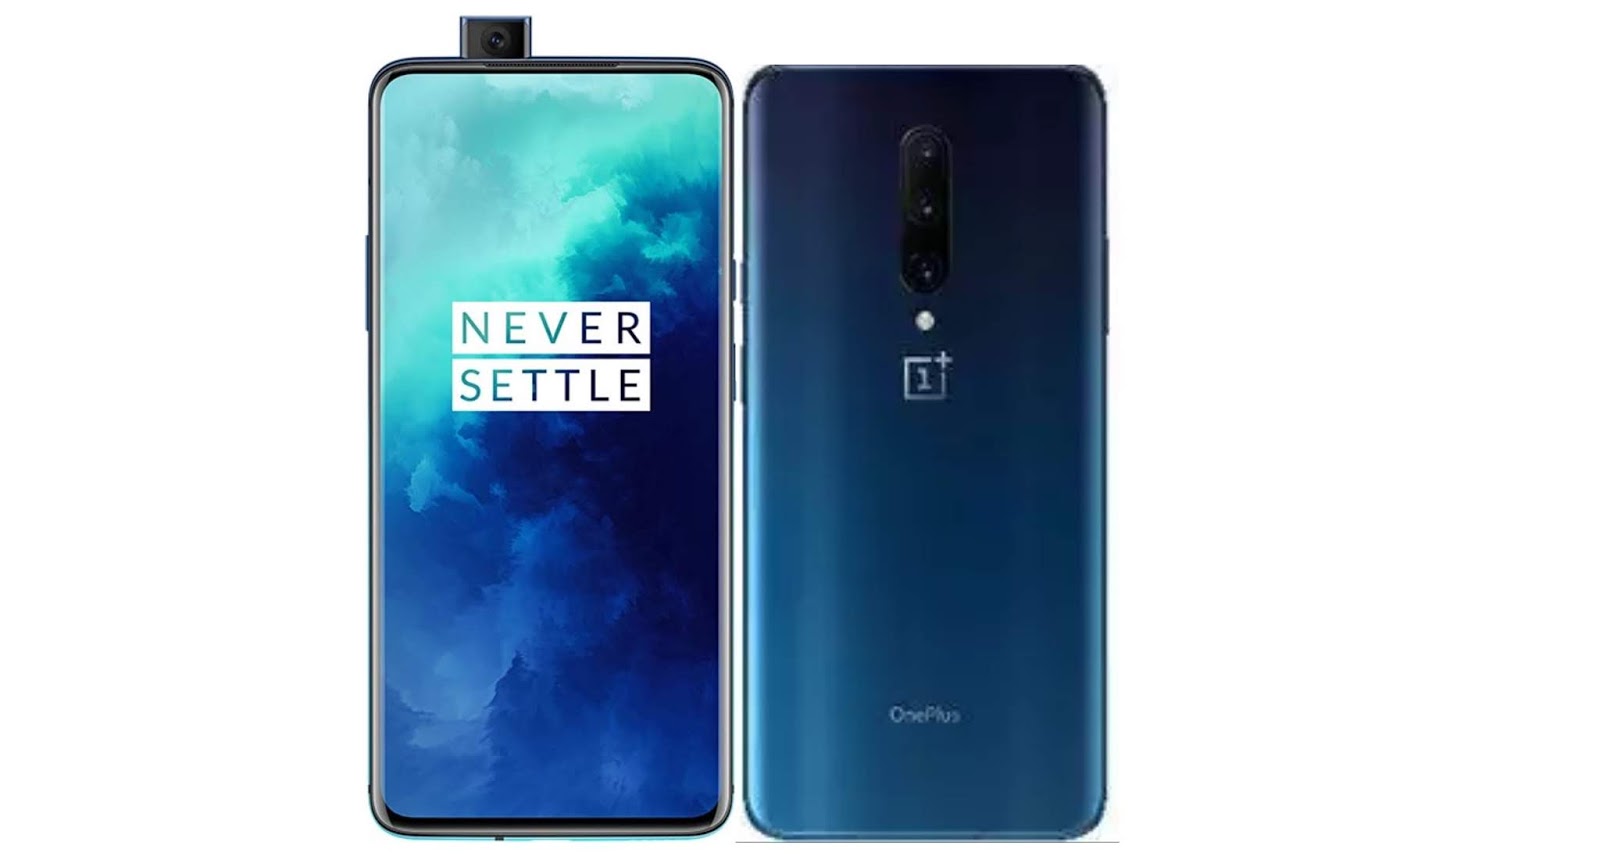 OnePlus 7T Pro ! Flagship Smartphone by One plus in 2019